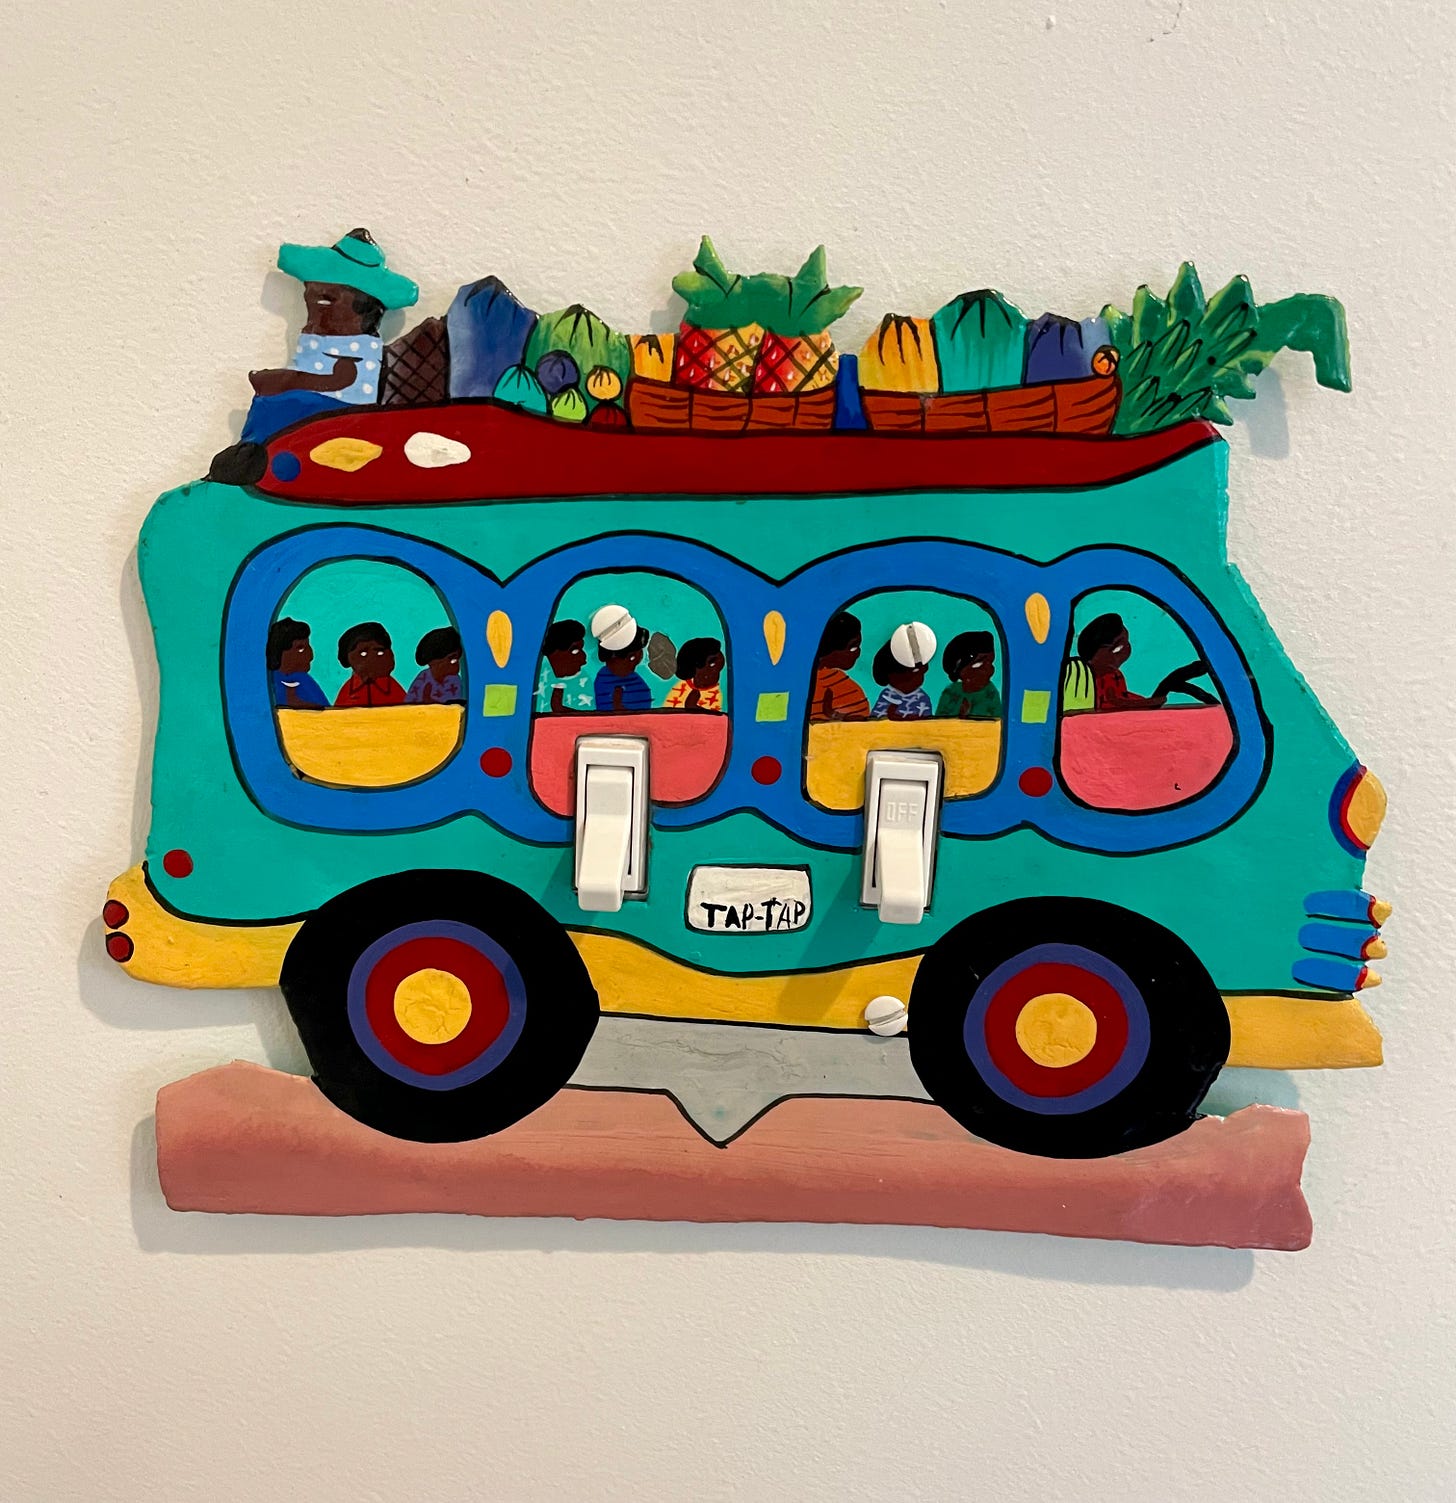 A steel drum taxi van light switch cover made in Haiti.